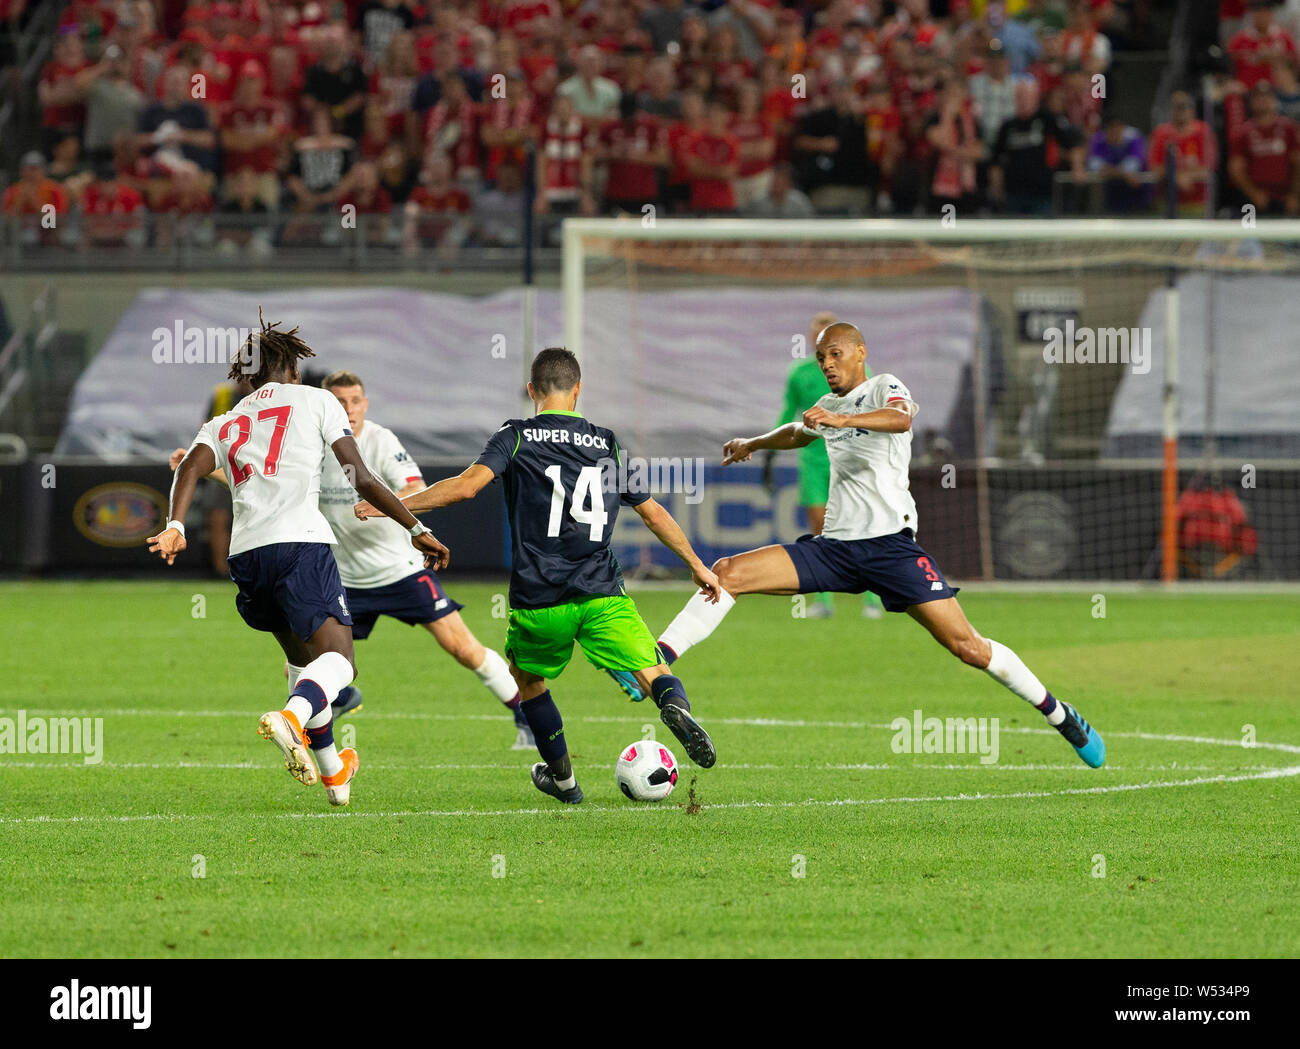 New York, United States. 24th July, 2019. Luis Neto (14) of Sporting CP controls ball during pre-season game against Liverpool FC at Yankee stadium Game ended in draw 2 - 2 Credit: Lev Radin/Pacific Press/Alamy Live News Stock Photo